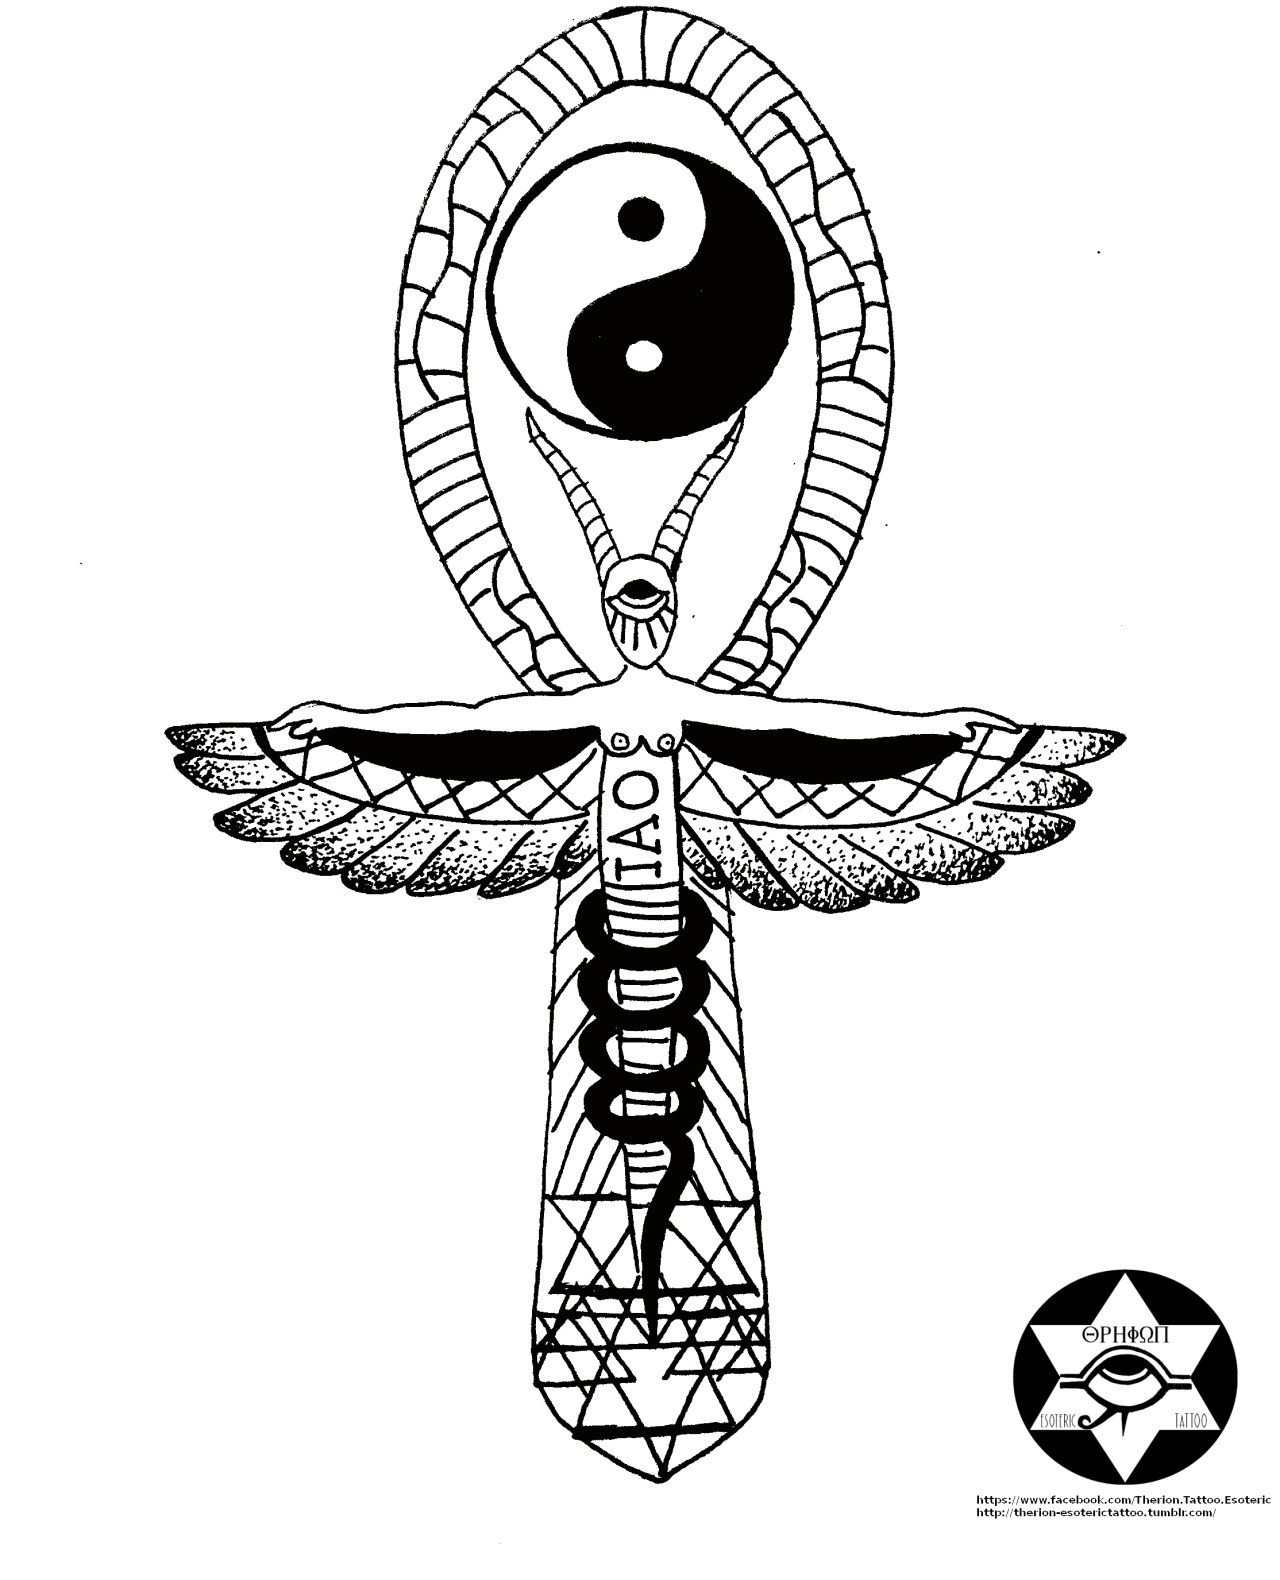  HPION ESOTERIC TATTOO This drawing is a revision of the Egyptian 